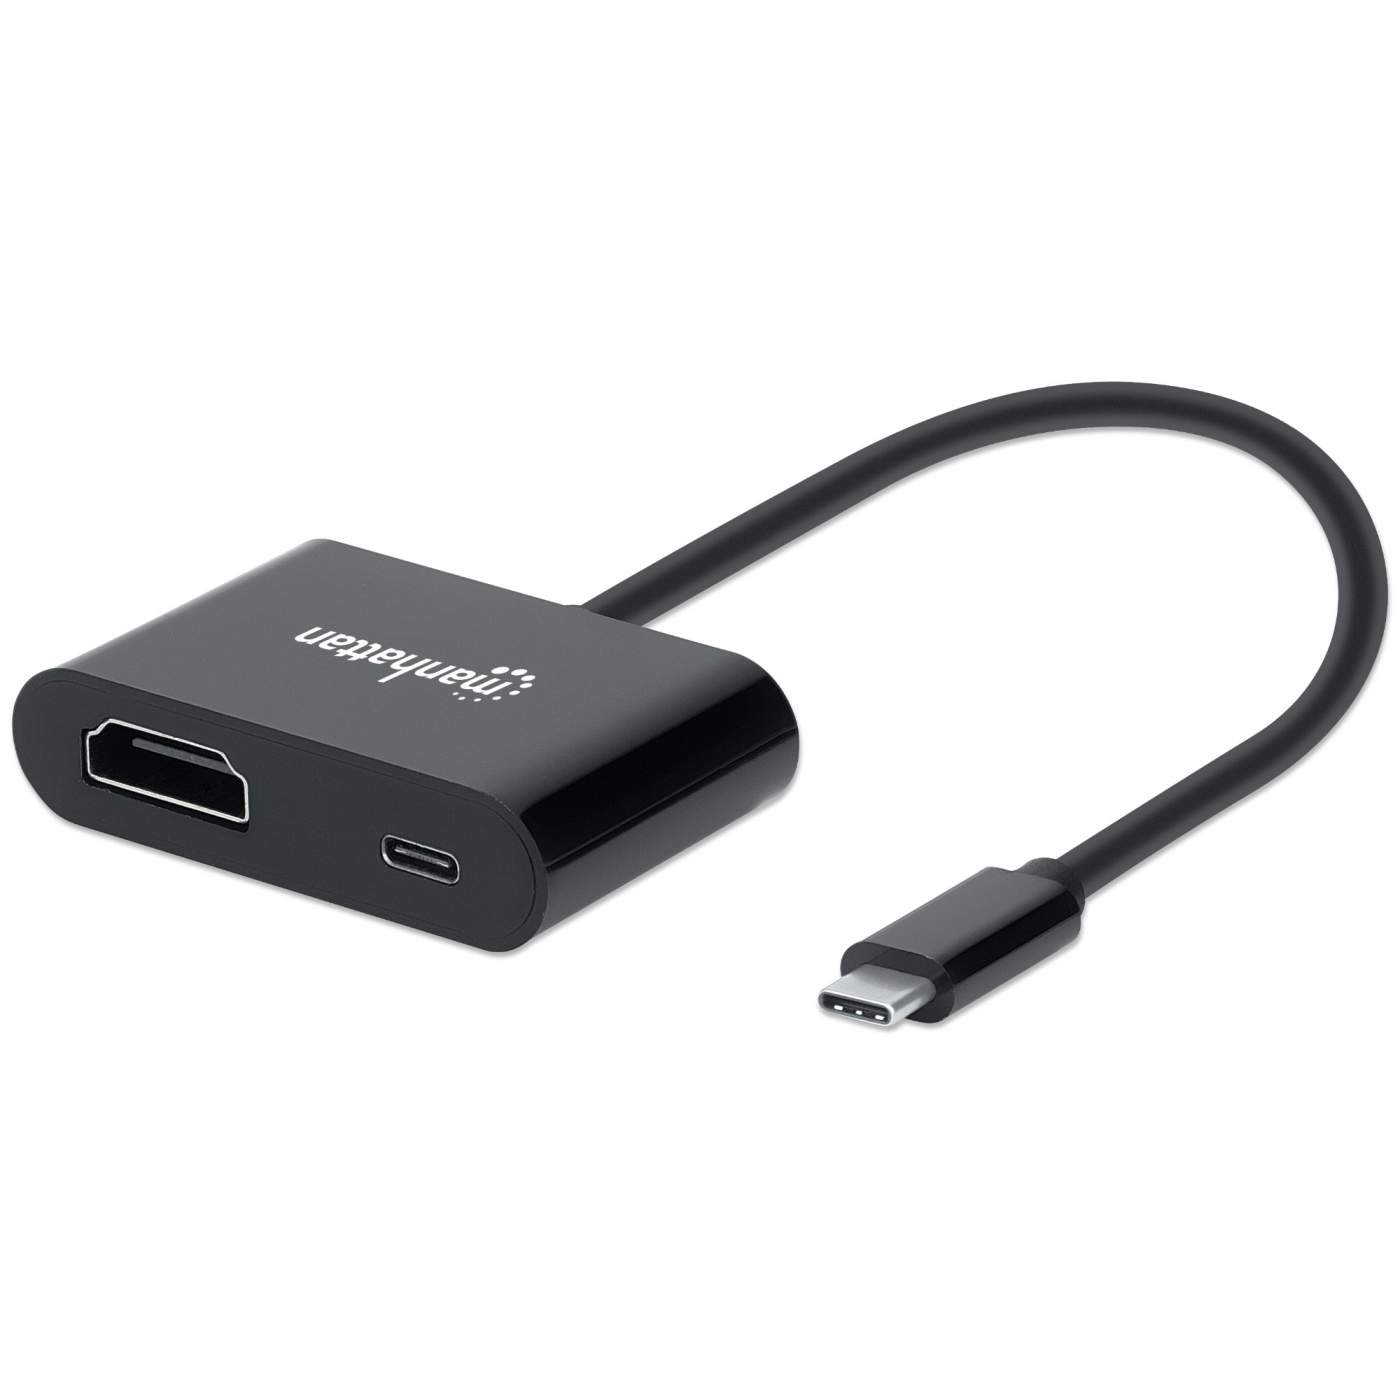 Manhattan USB-C to HDMI Converter w/ Power Delivery Port (153416)